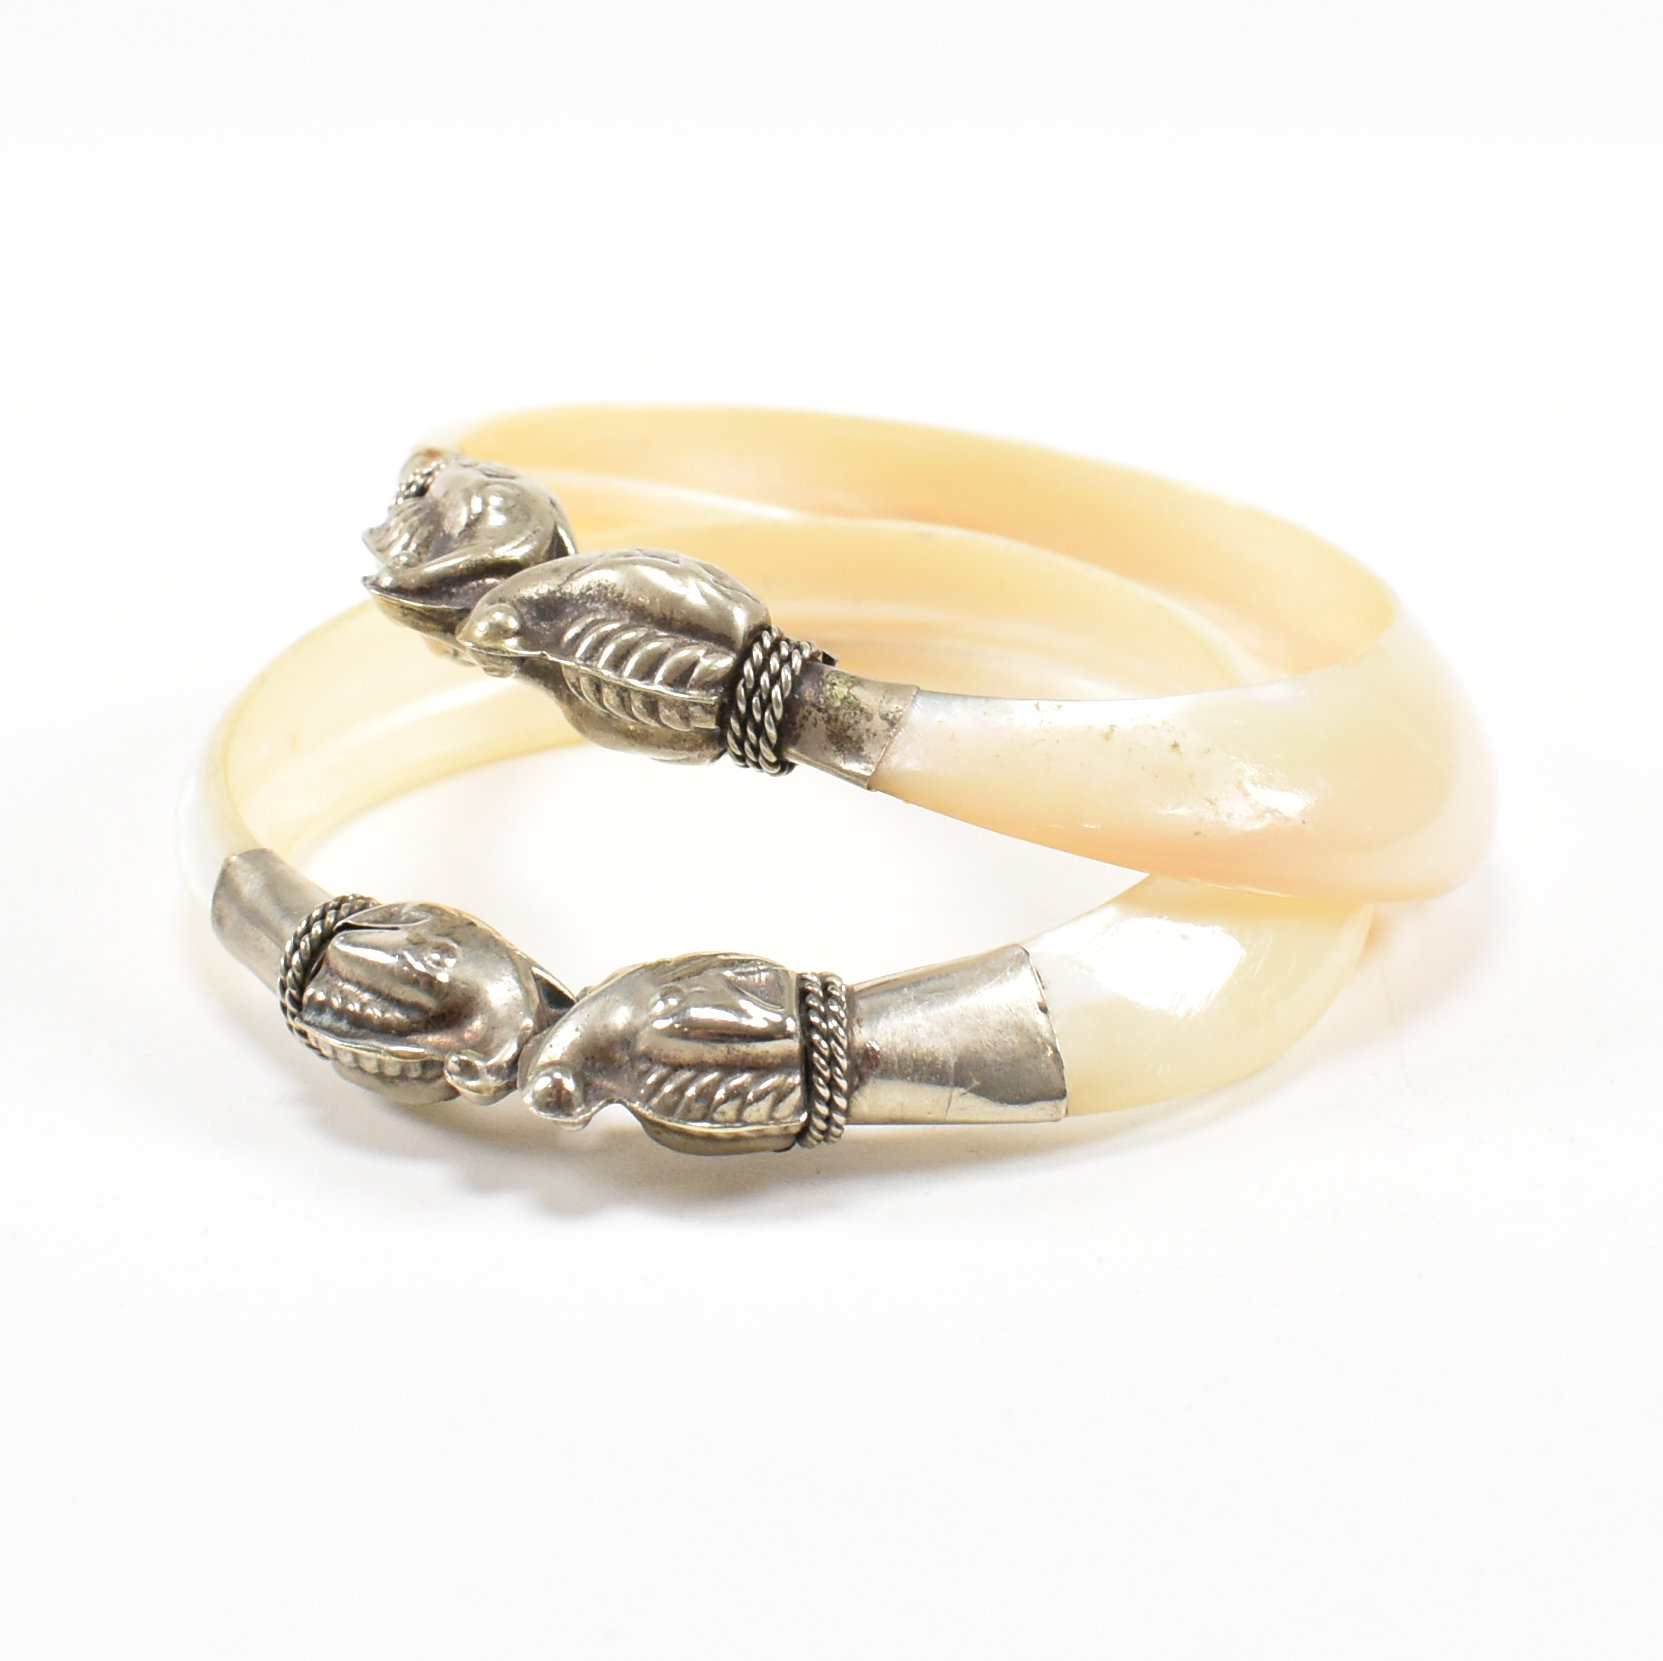 PAIR OF MOTHER OF PEARL BANGLES - Image 2 of 9